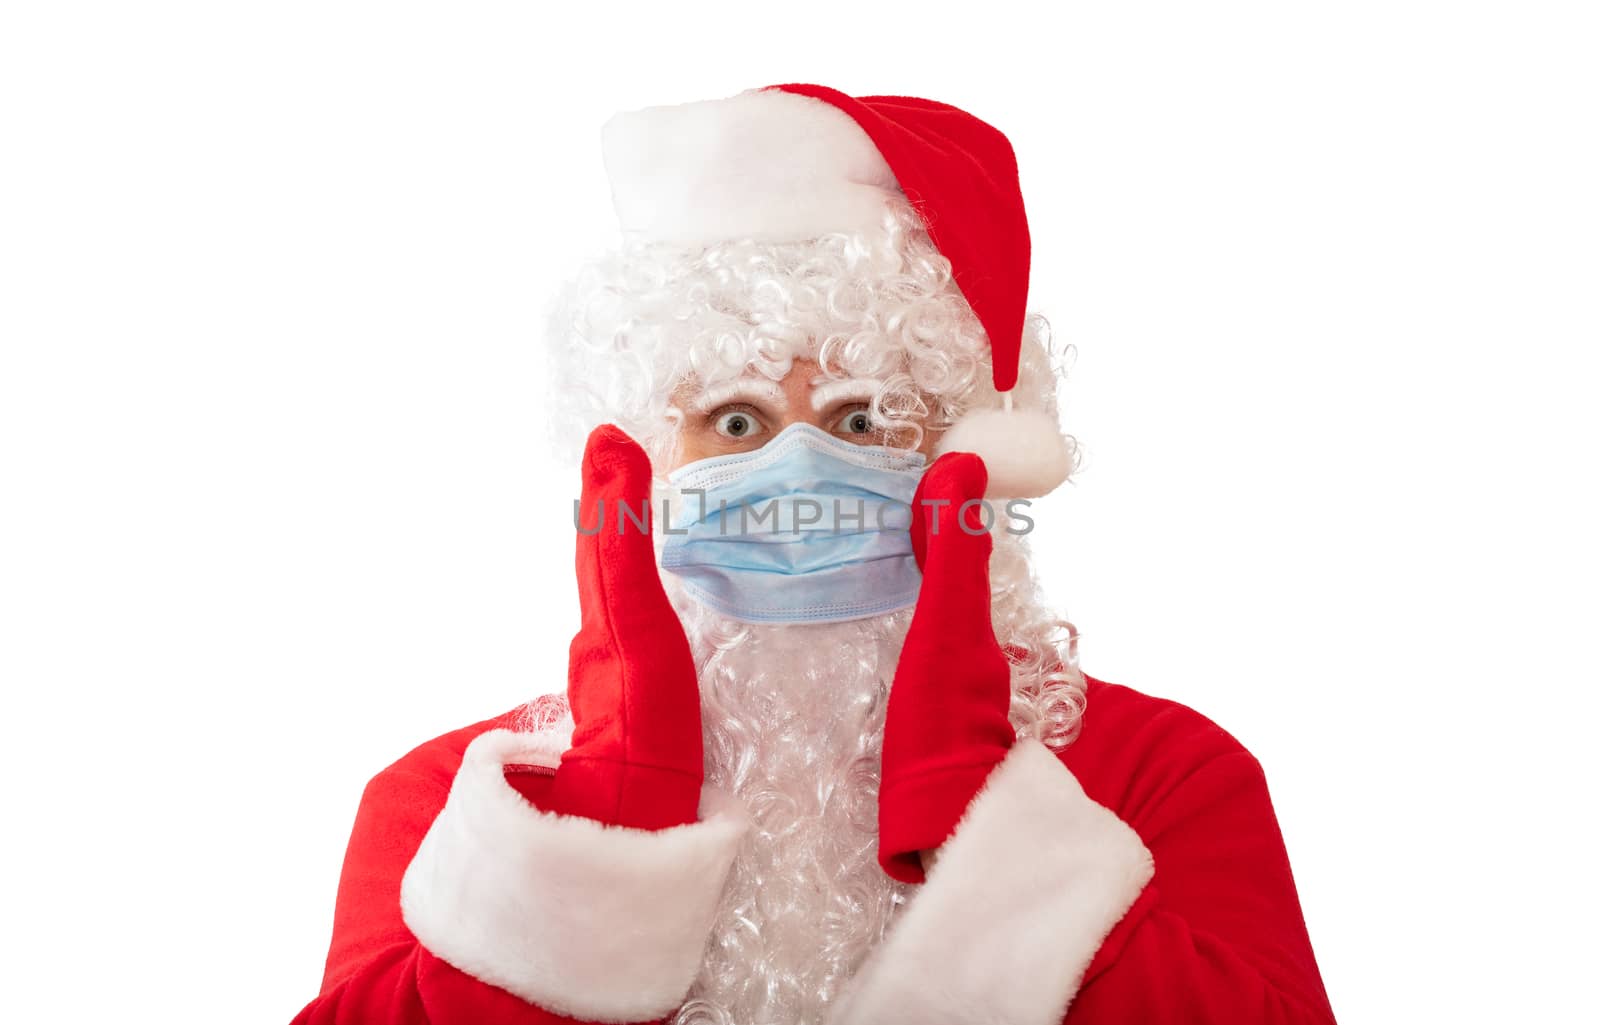 View of a man wearing a Santa Claus costume and medical mask with his arms by his face and eyes wide open, isolated on white background. Man looks scared. New normal, pandemic holiday concepts by DamantisZ